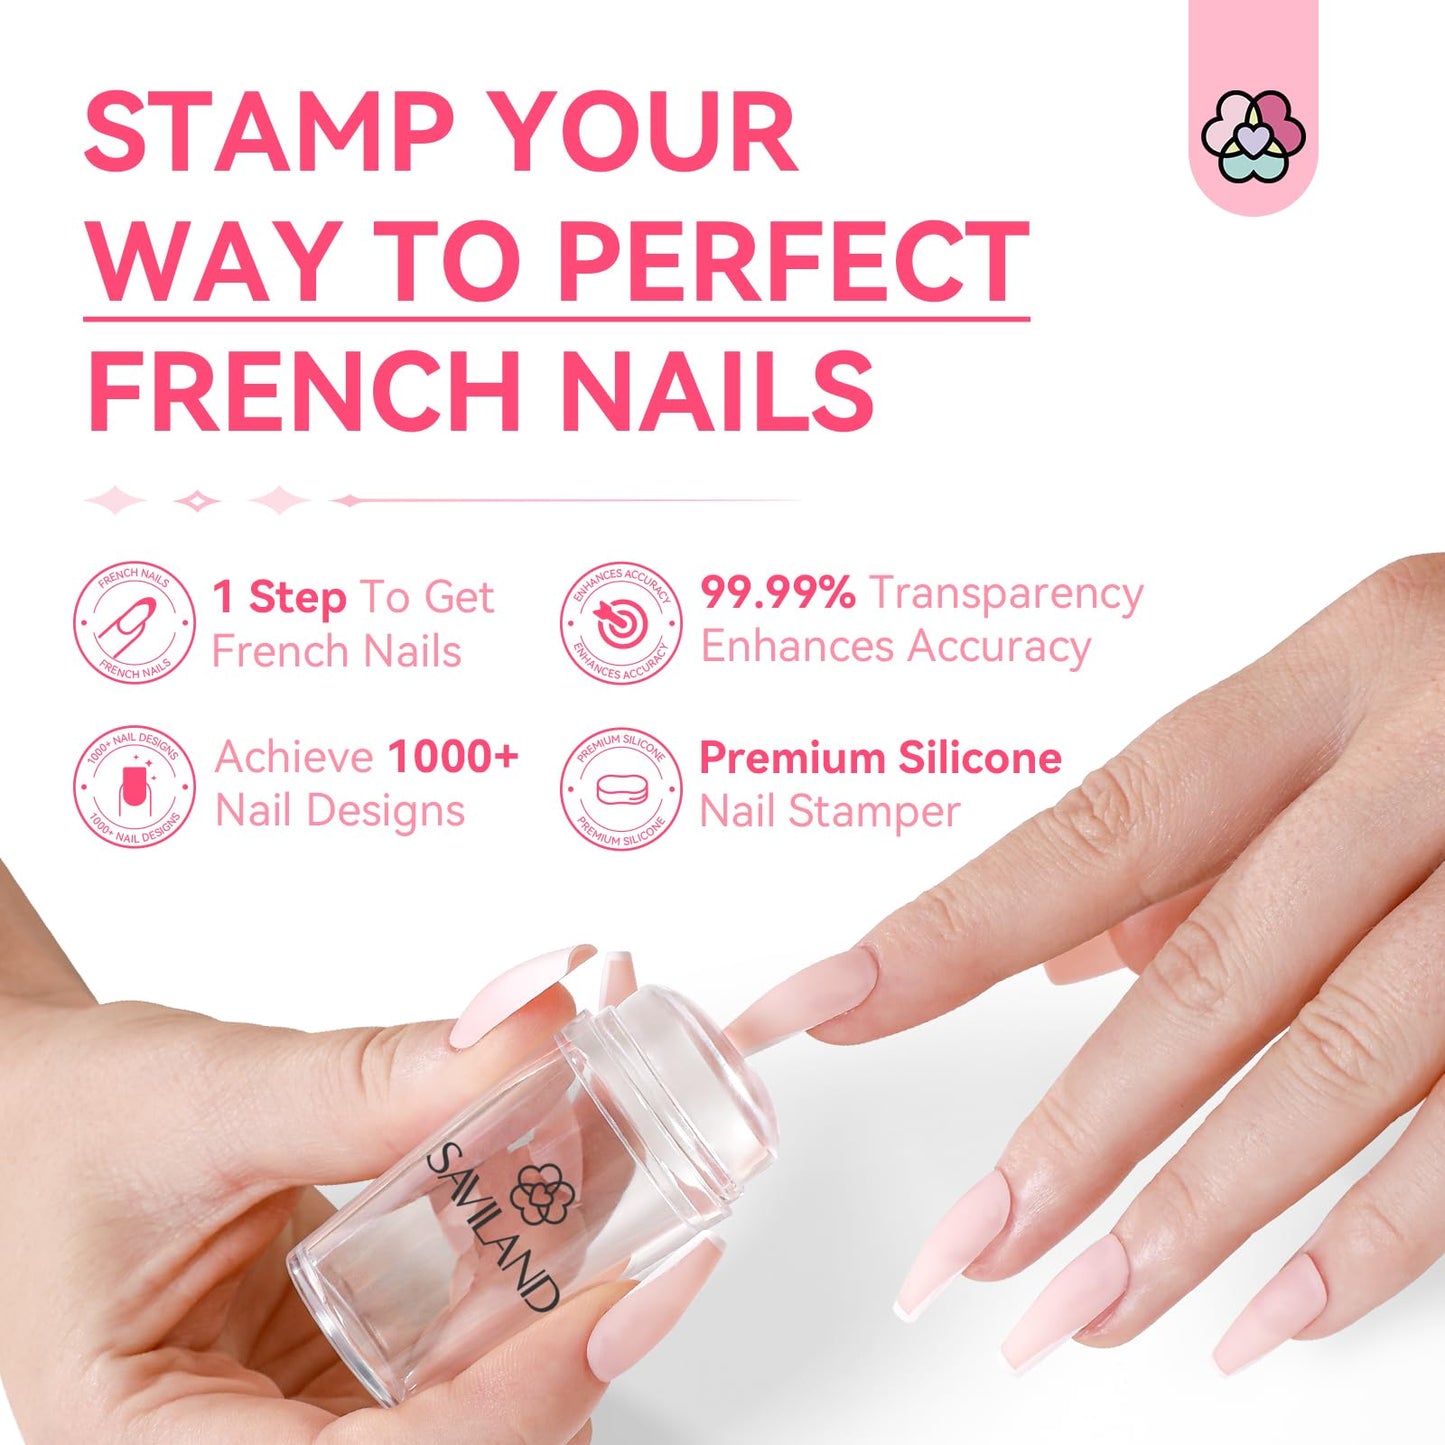 Saviland French Tip Nail Stamp - 4PCS Nail Art Stamper Kit Clear Silicone Nail Stamping Long & Short Jelly Stamper for Nails with Scrapers Nail Stamper Kit for French Manicure Home DIY Nail Art Salon